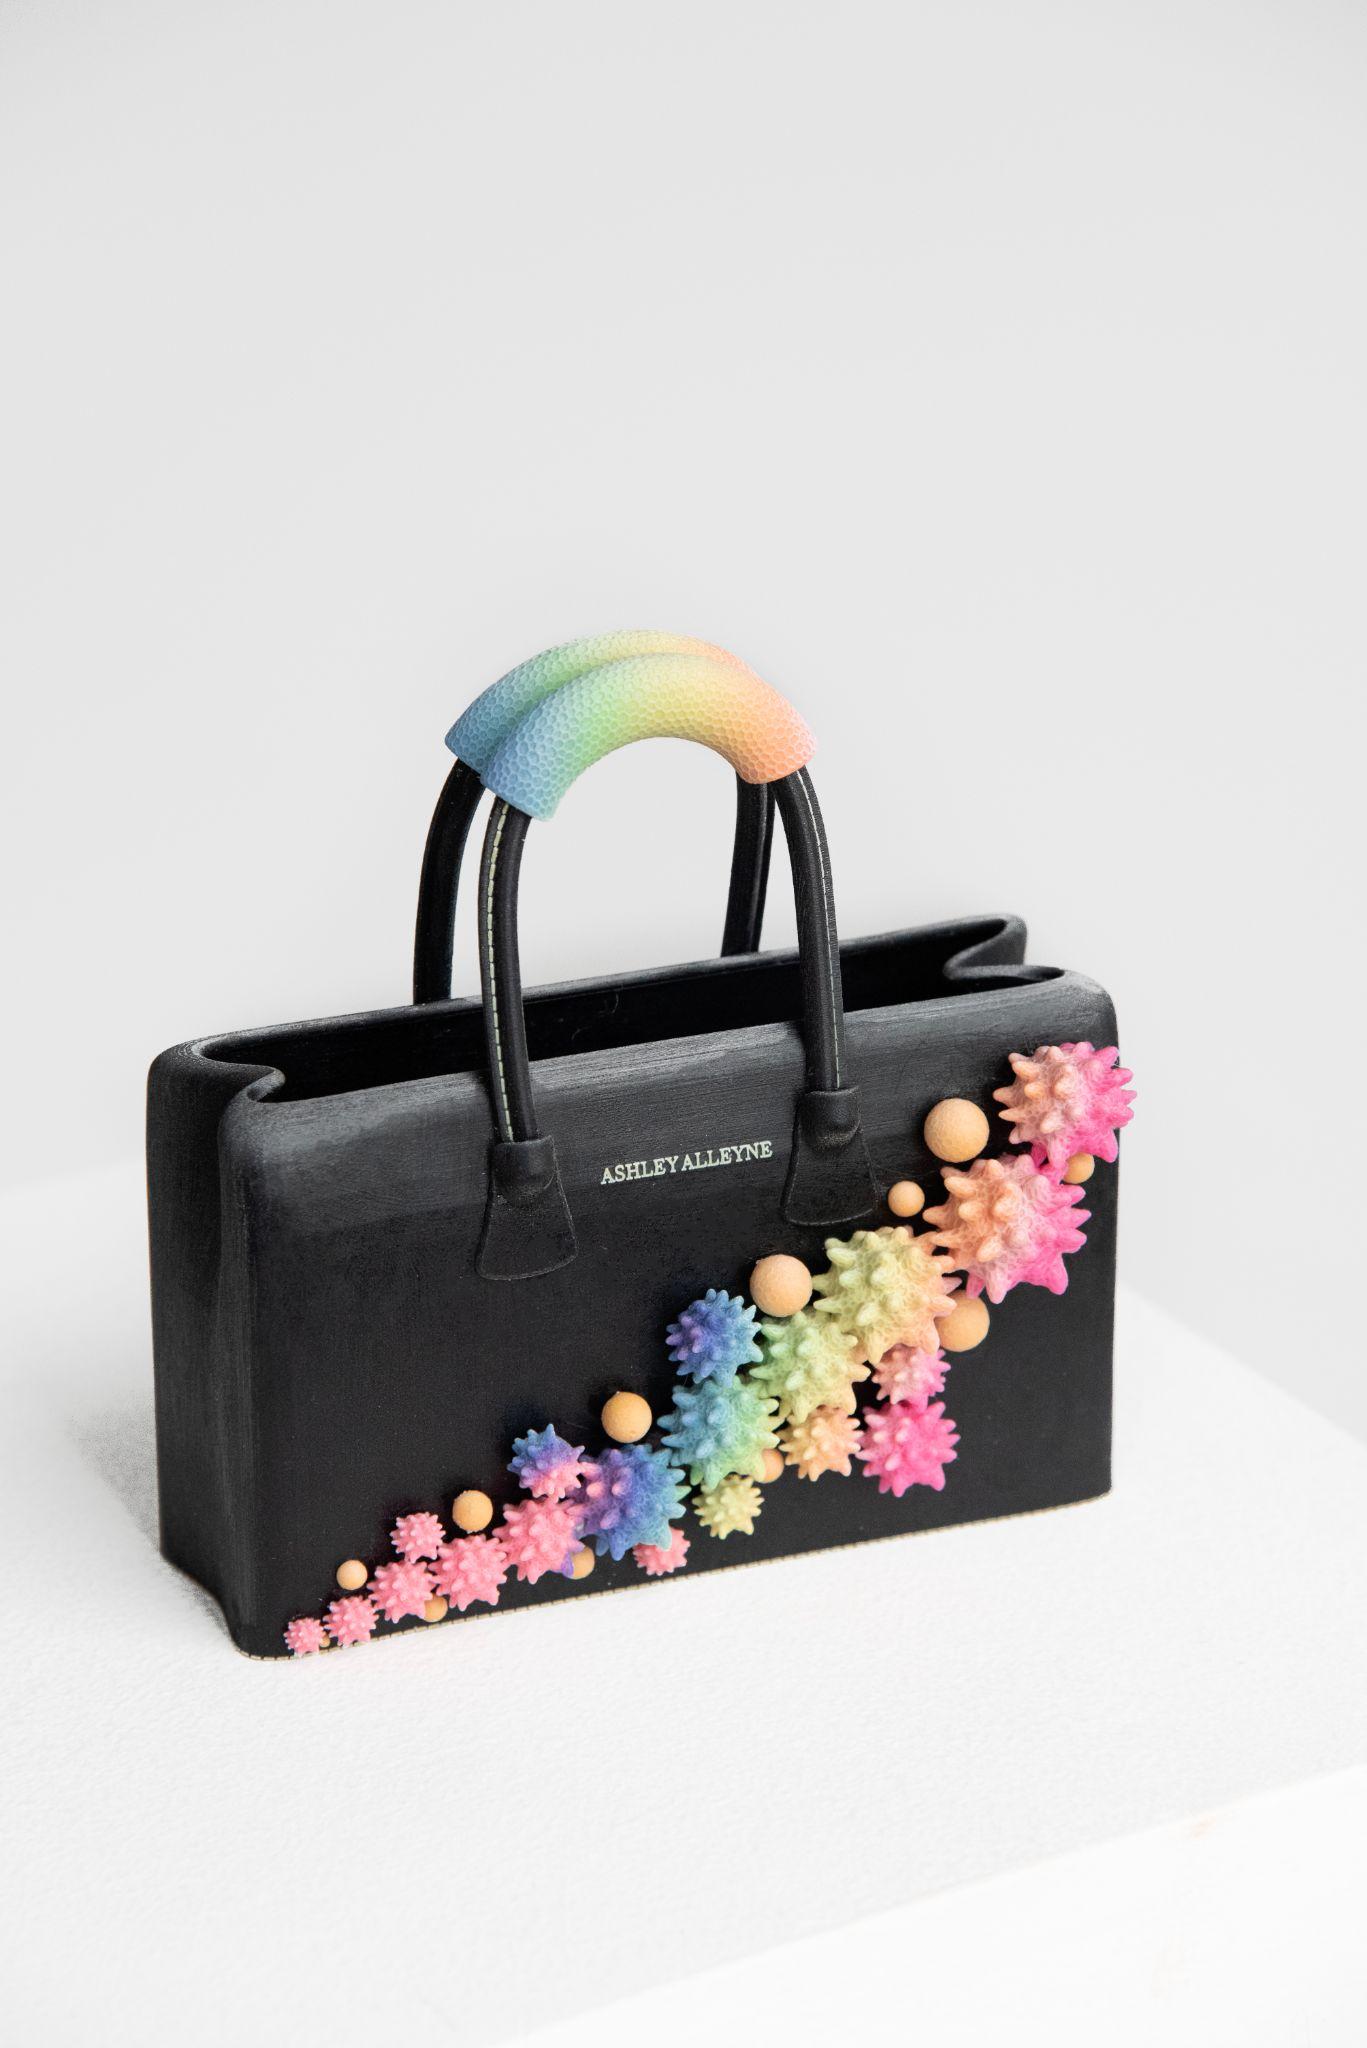 WoW!Louis Vuitton BAG From 3D Printing 